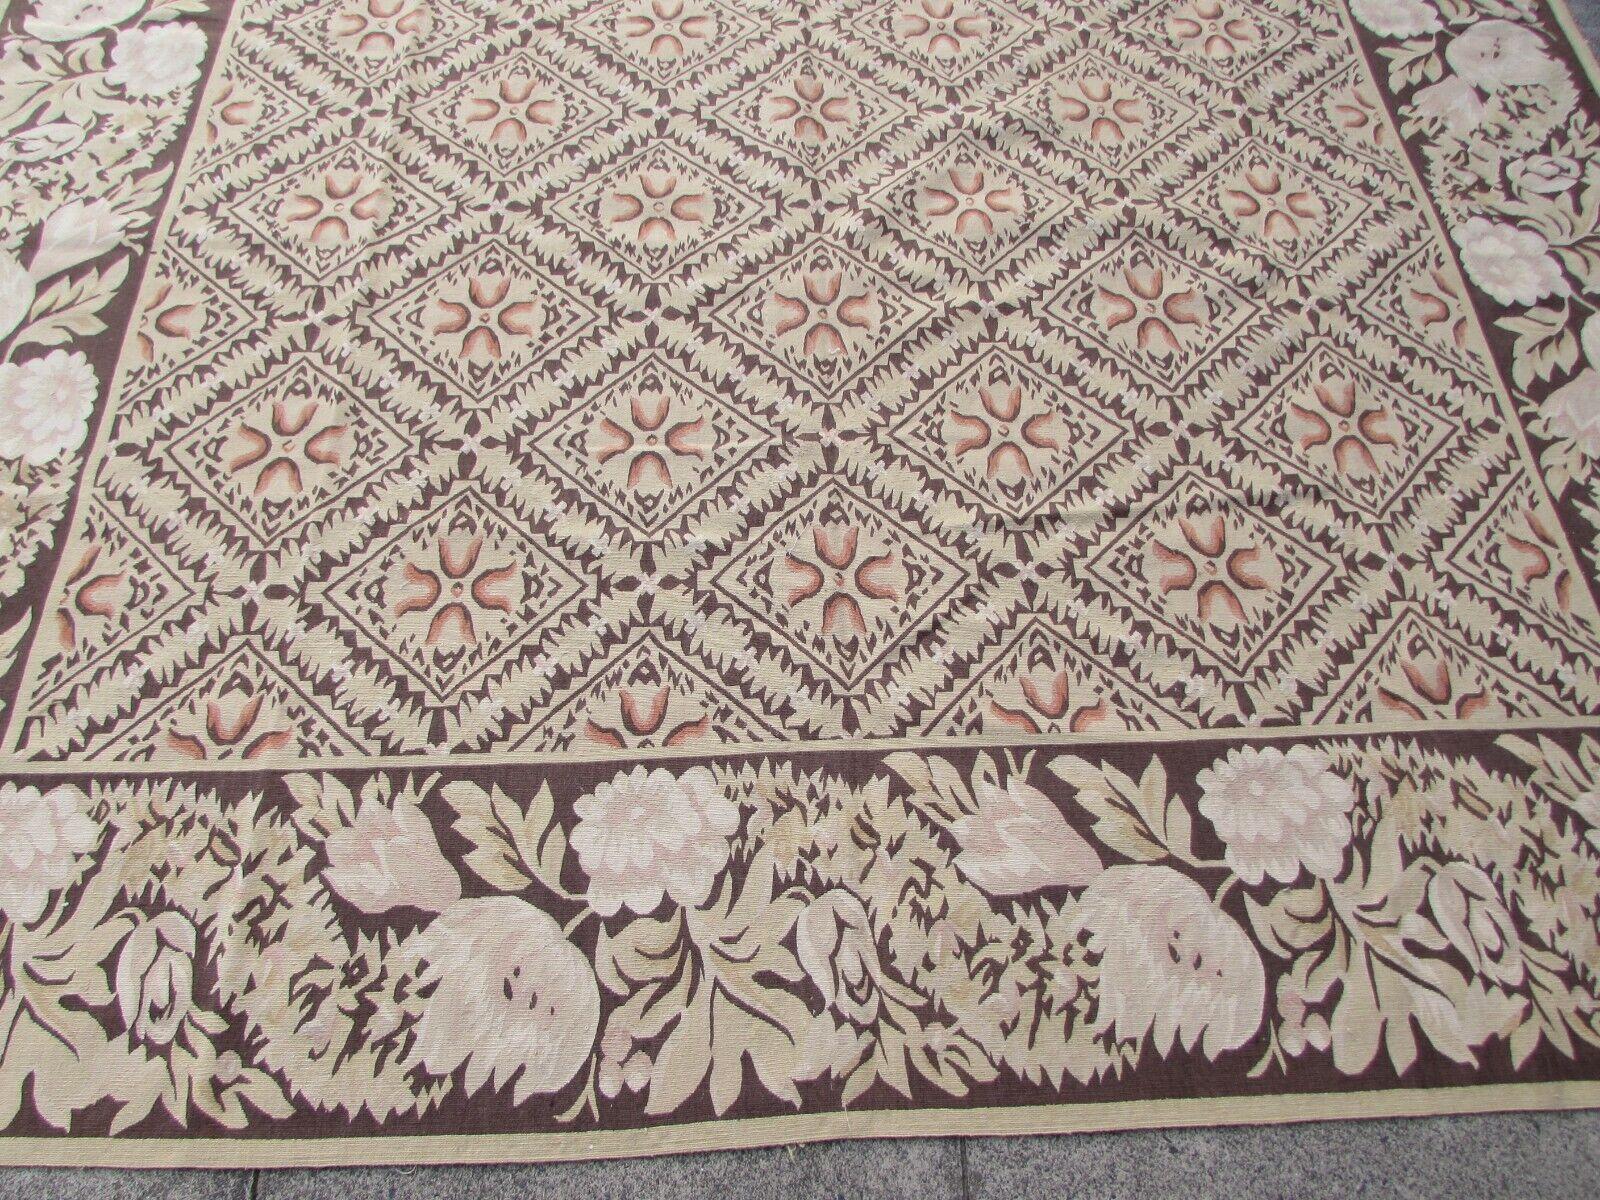 Handmade Vintage French Aubusson Flatweave Rug 7.9' x 9.8', 1970s, 1Q41 In Good Condition For Sale In Bordeaux, FR